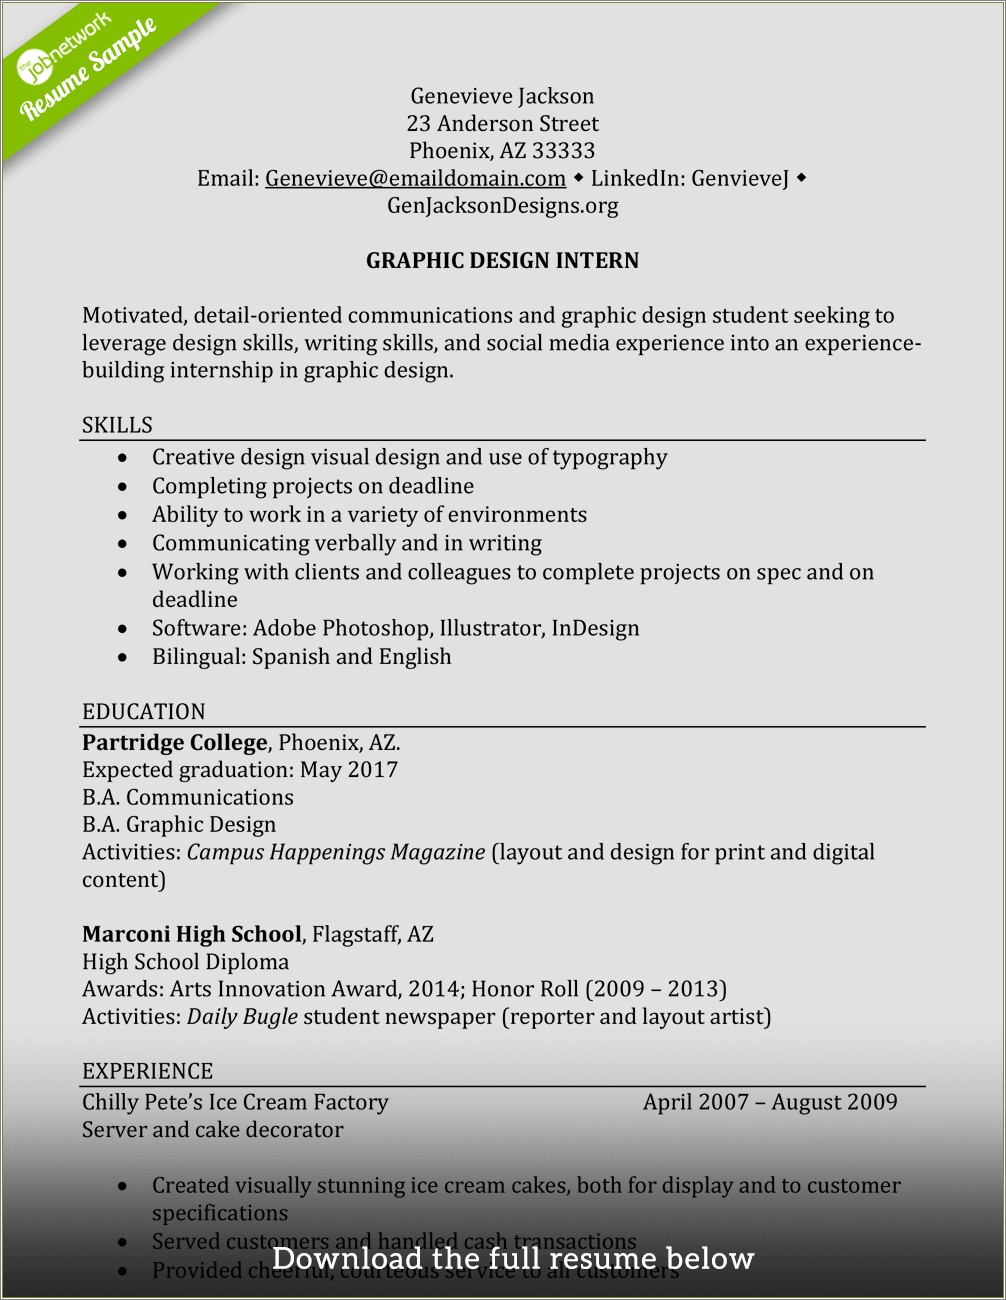 Sample Resume Format With Ojt Experience